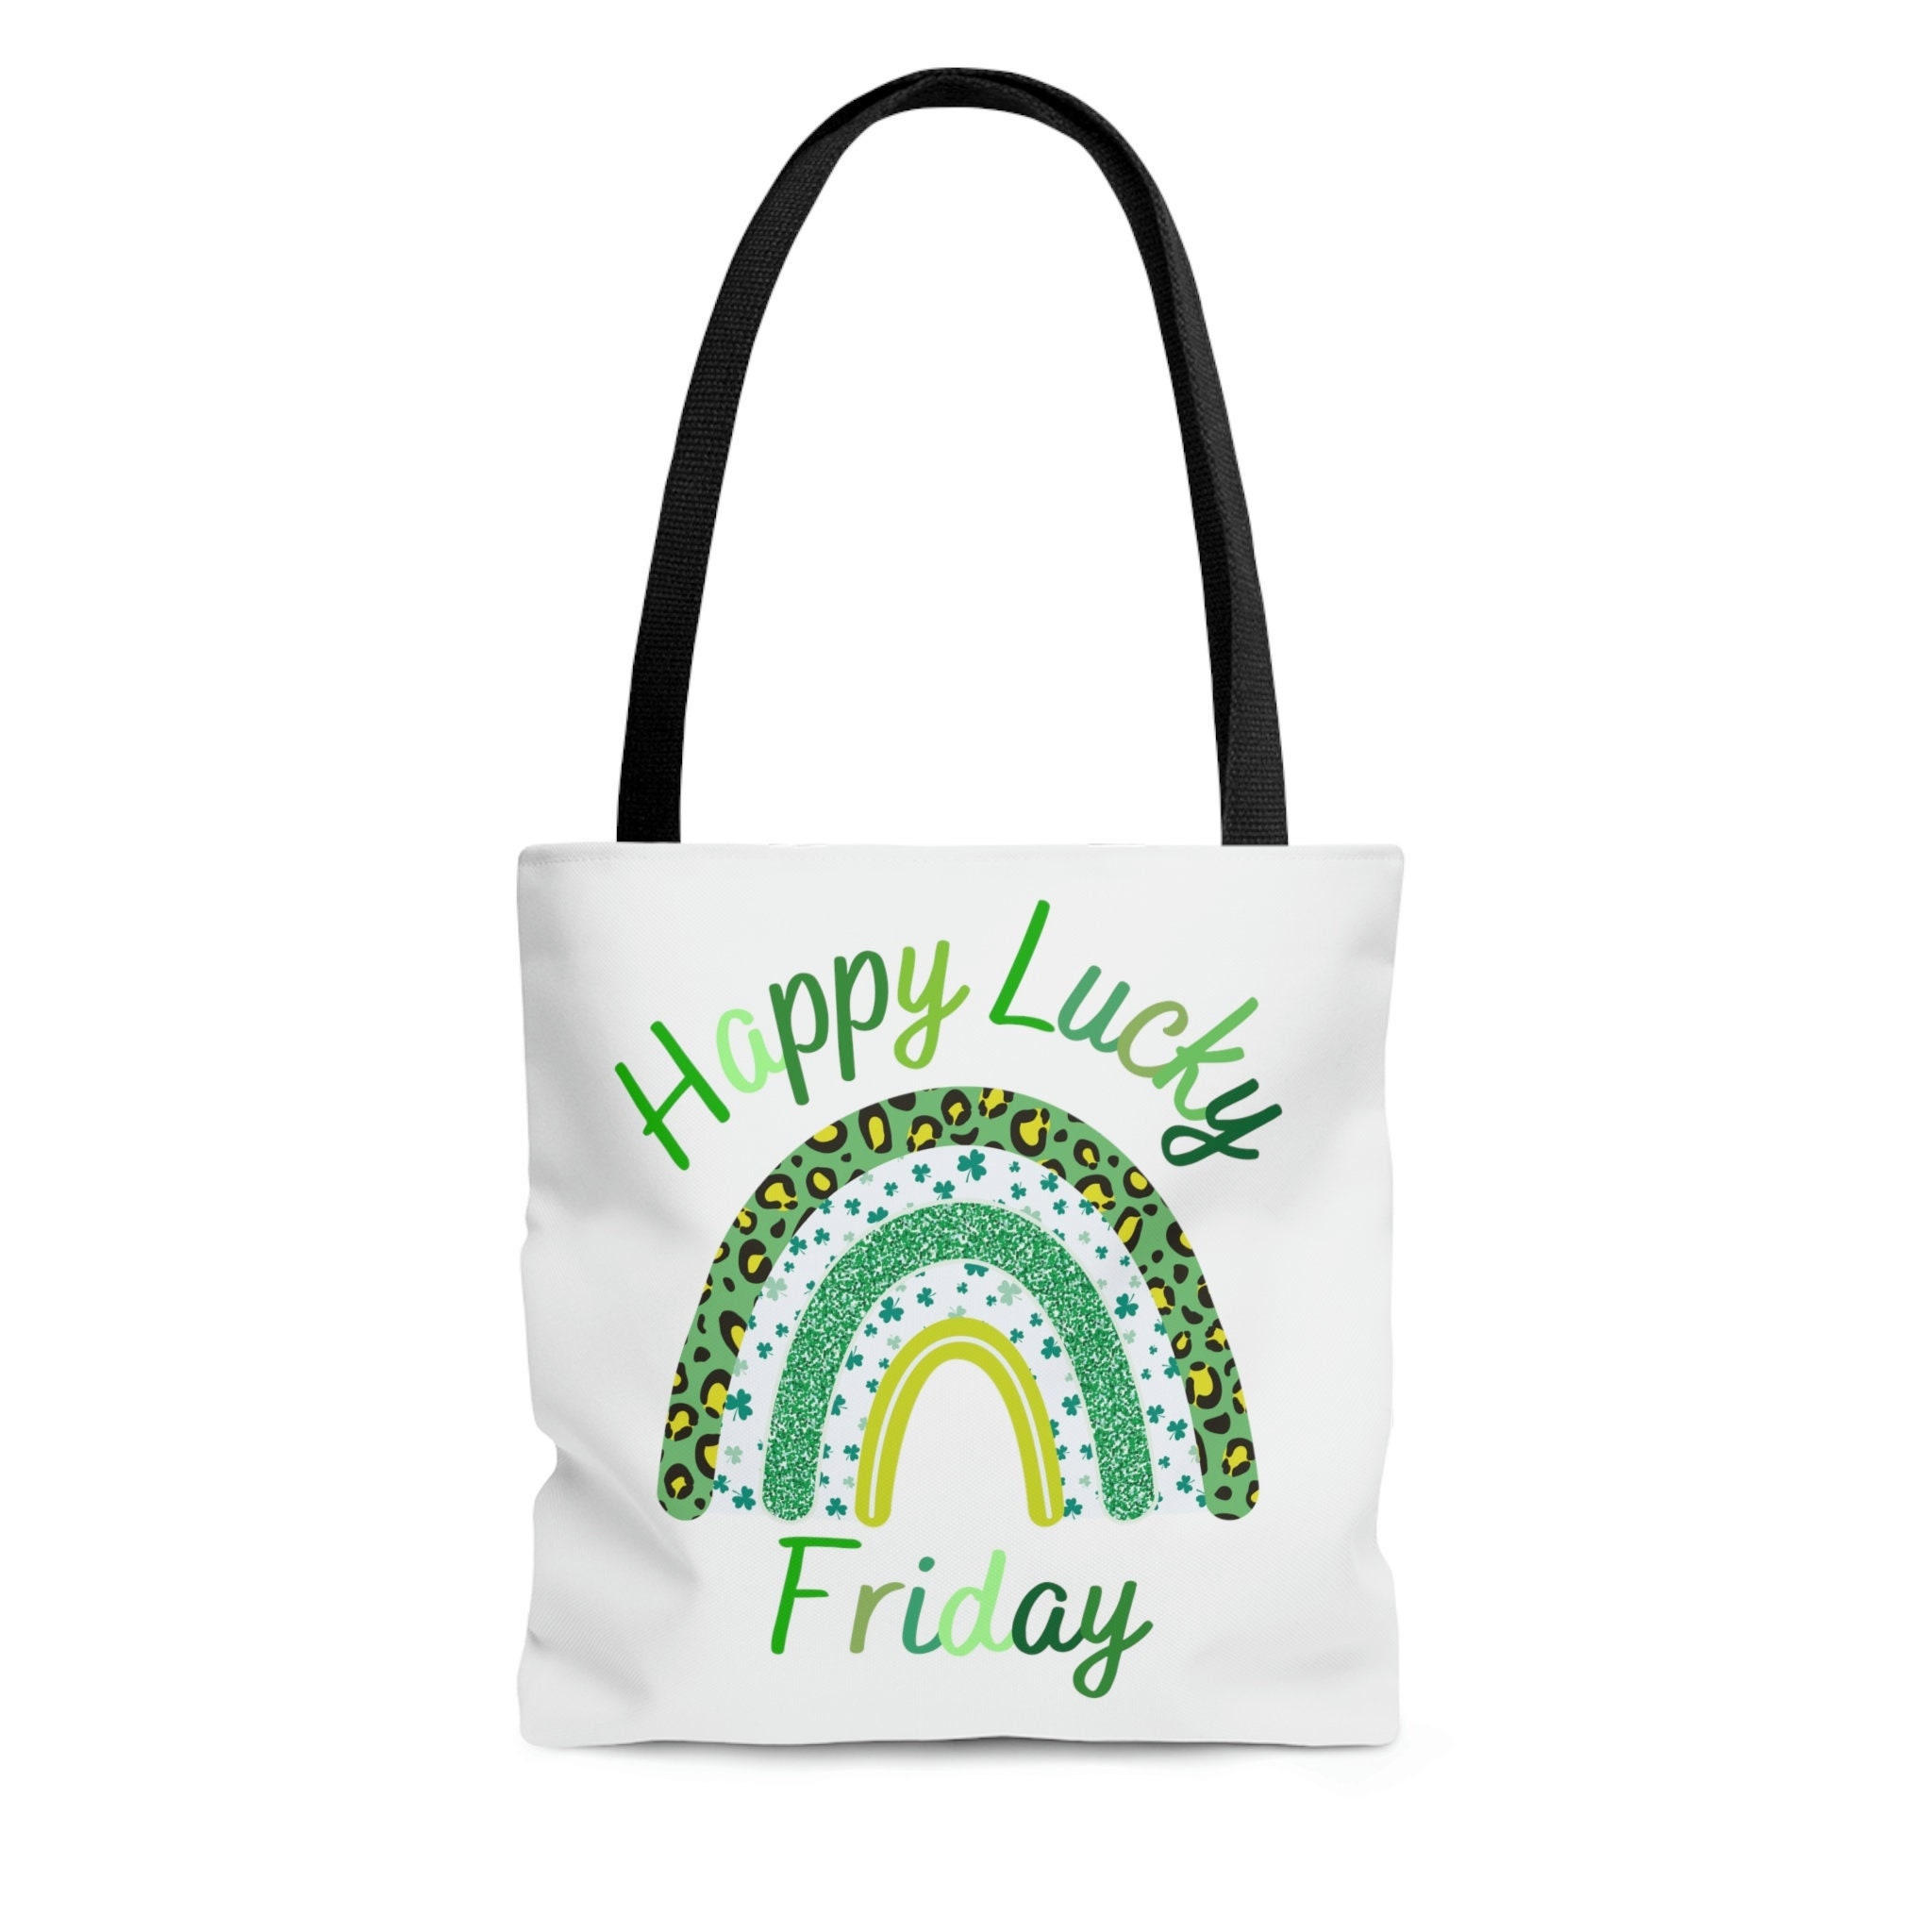 Friday Favorites - The Tote Bag That Changed My Life